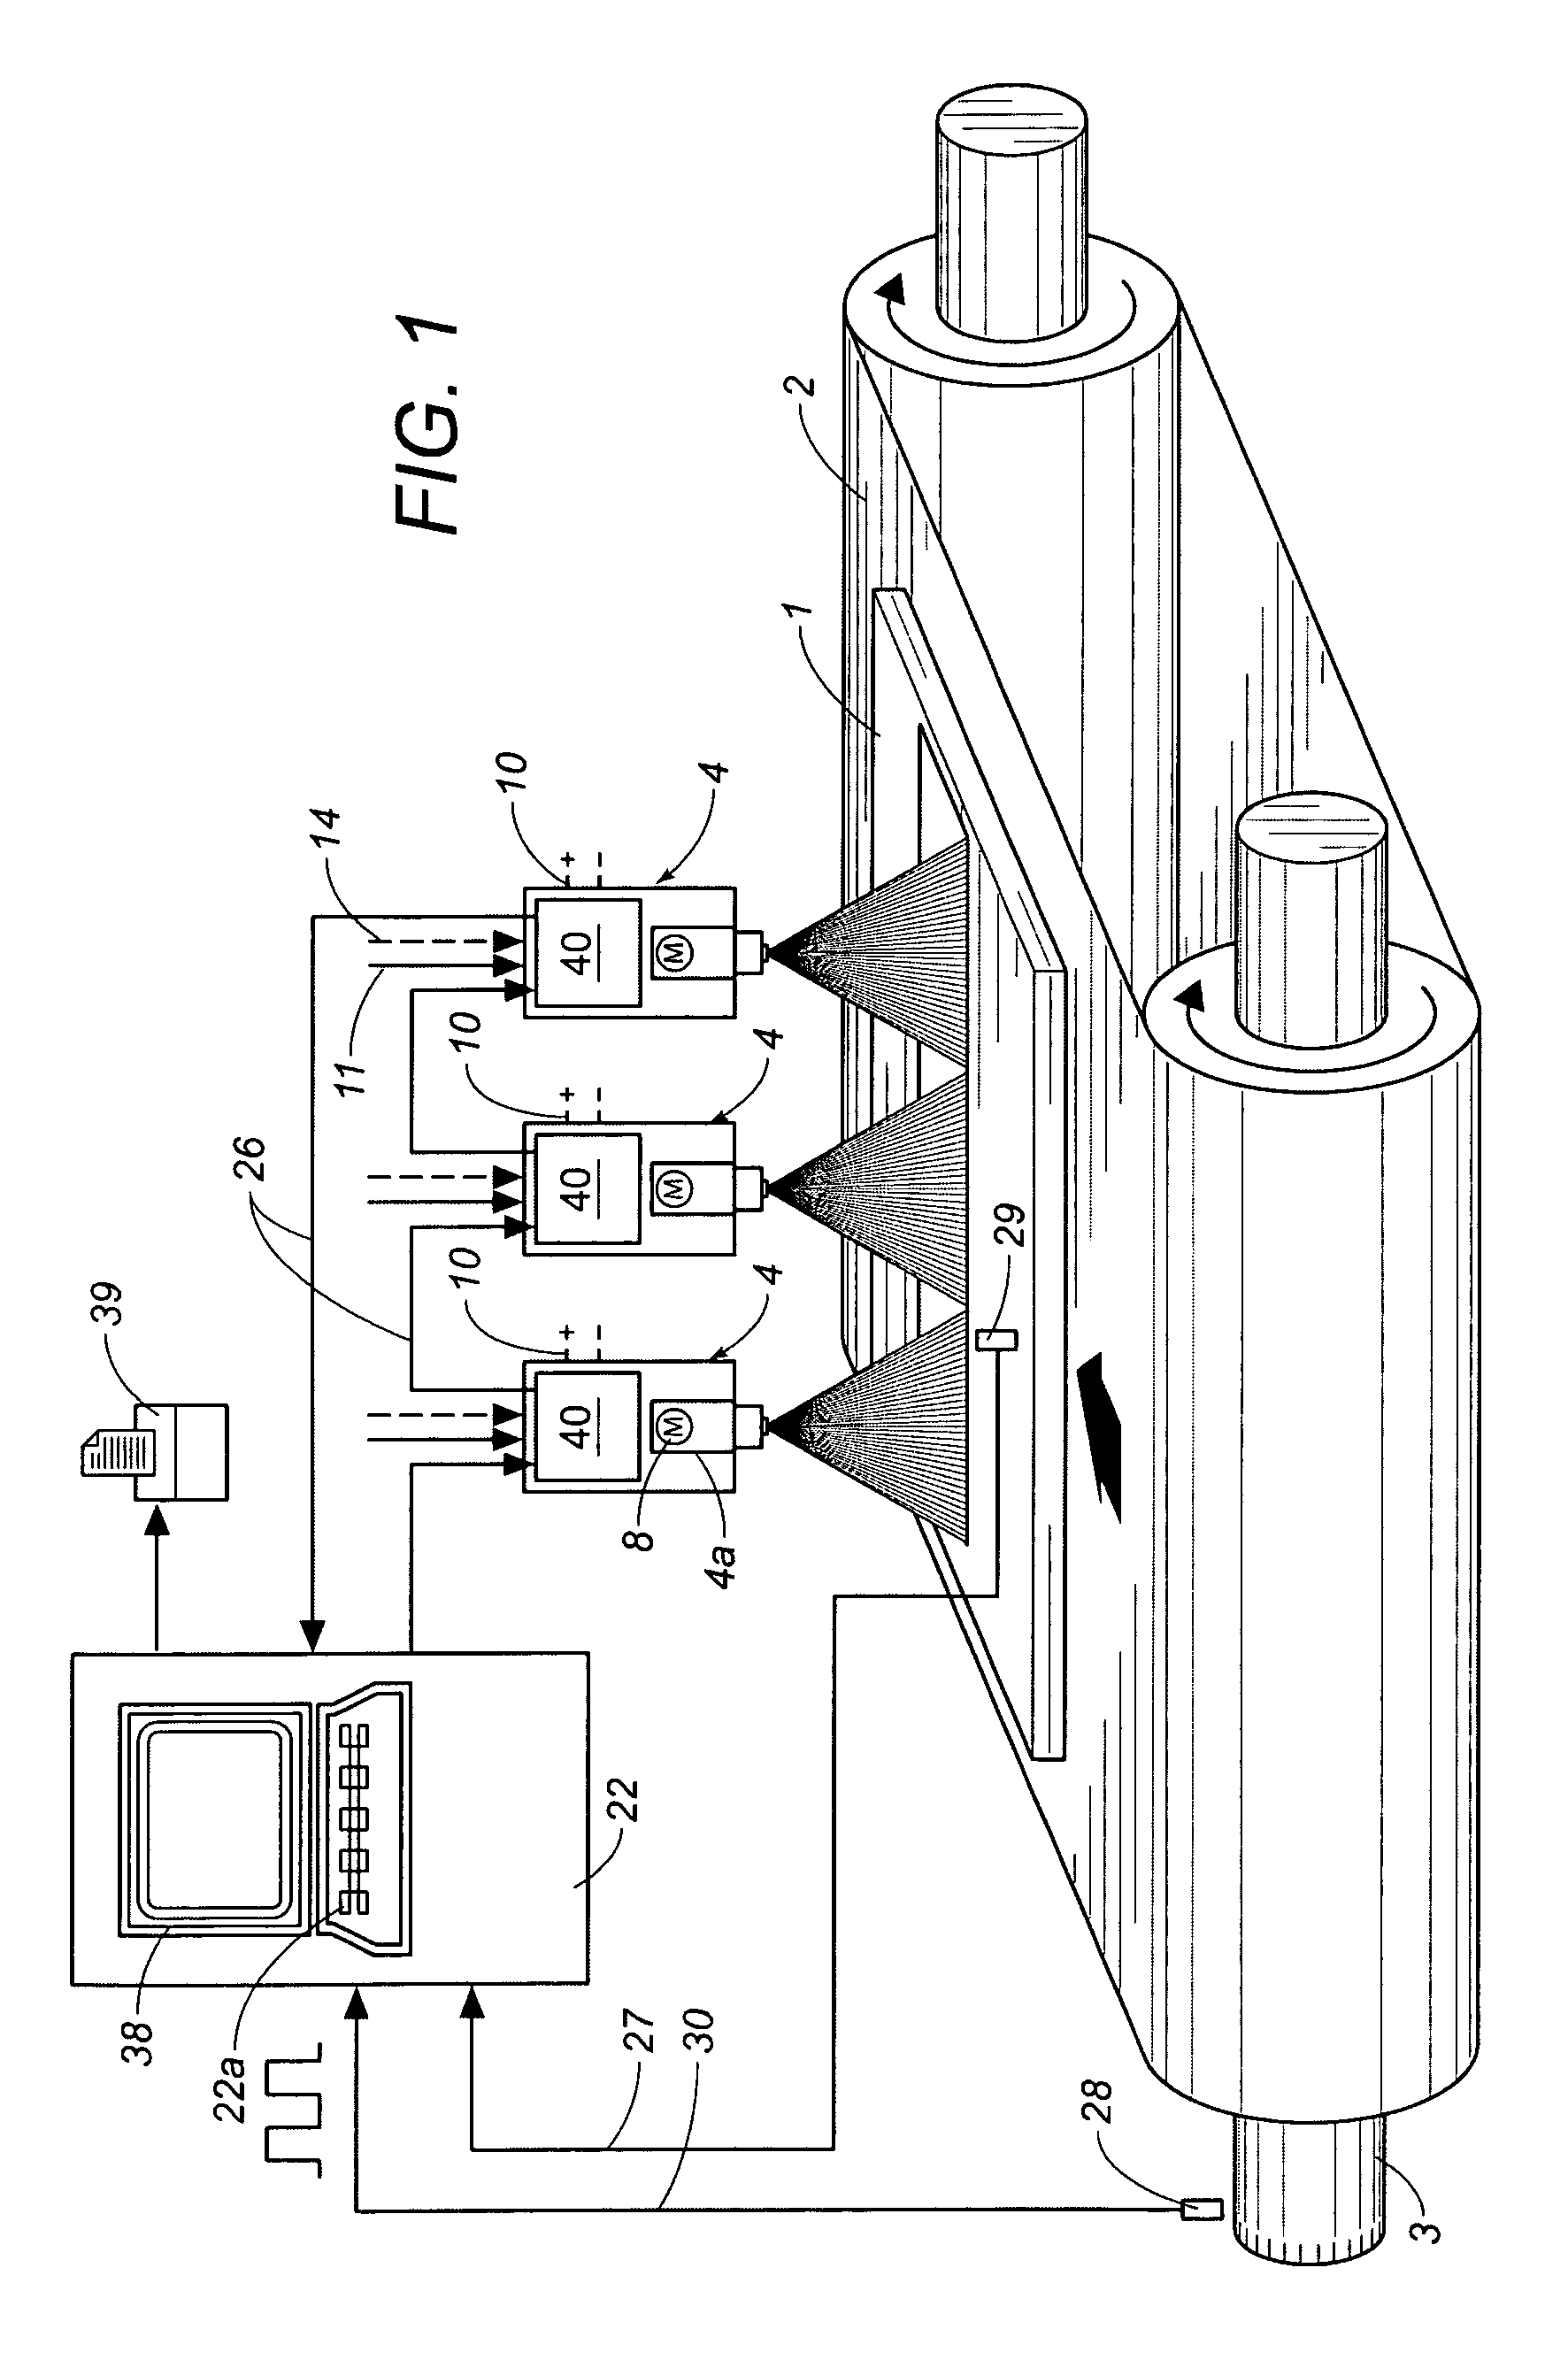 Device for applying a coating agent